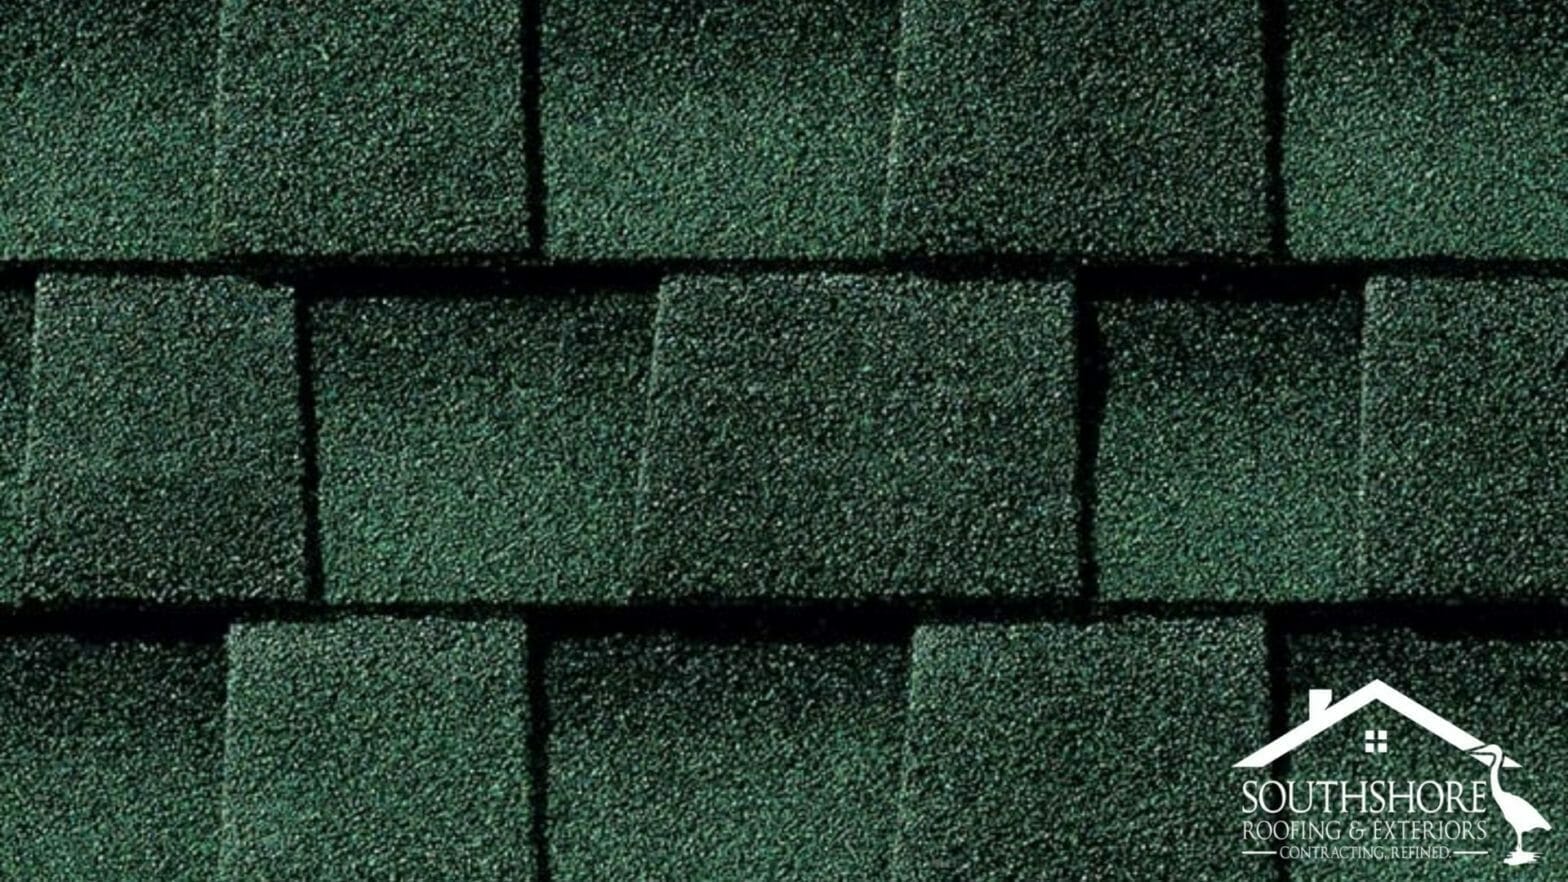 The Best GAF Shingles According To SouthShore Roofing & Exteriors